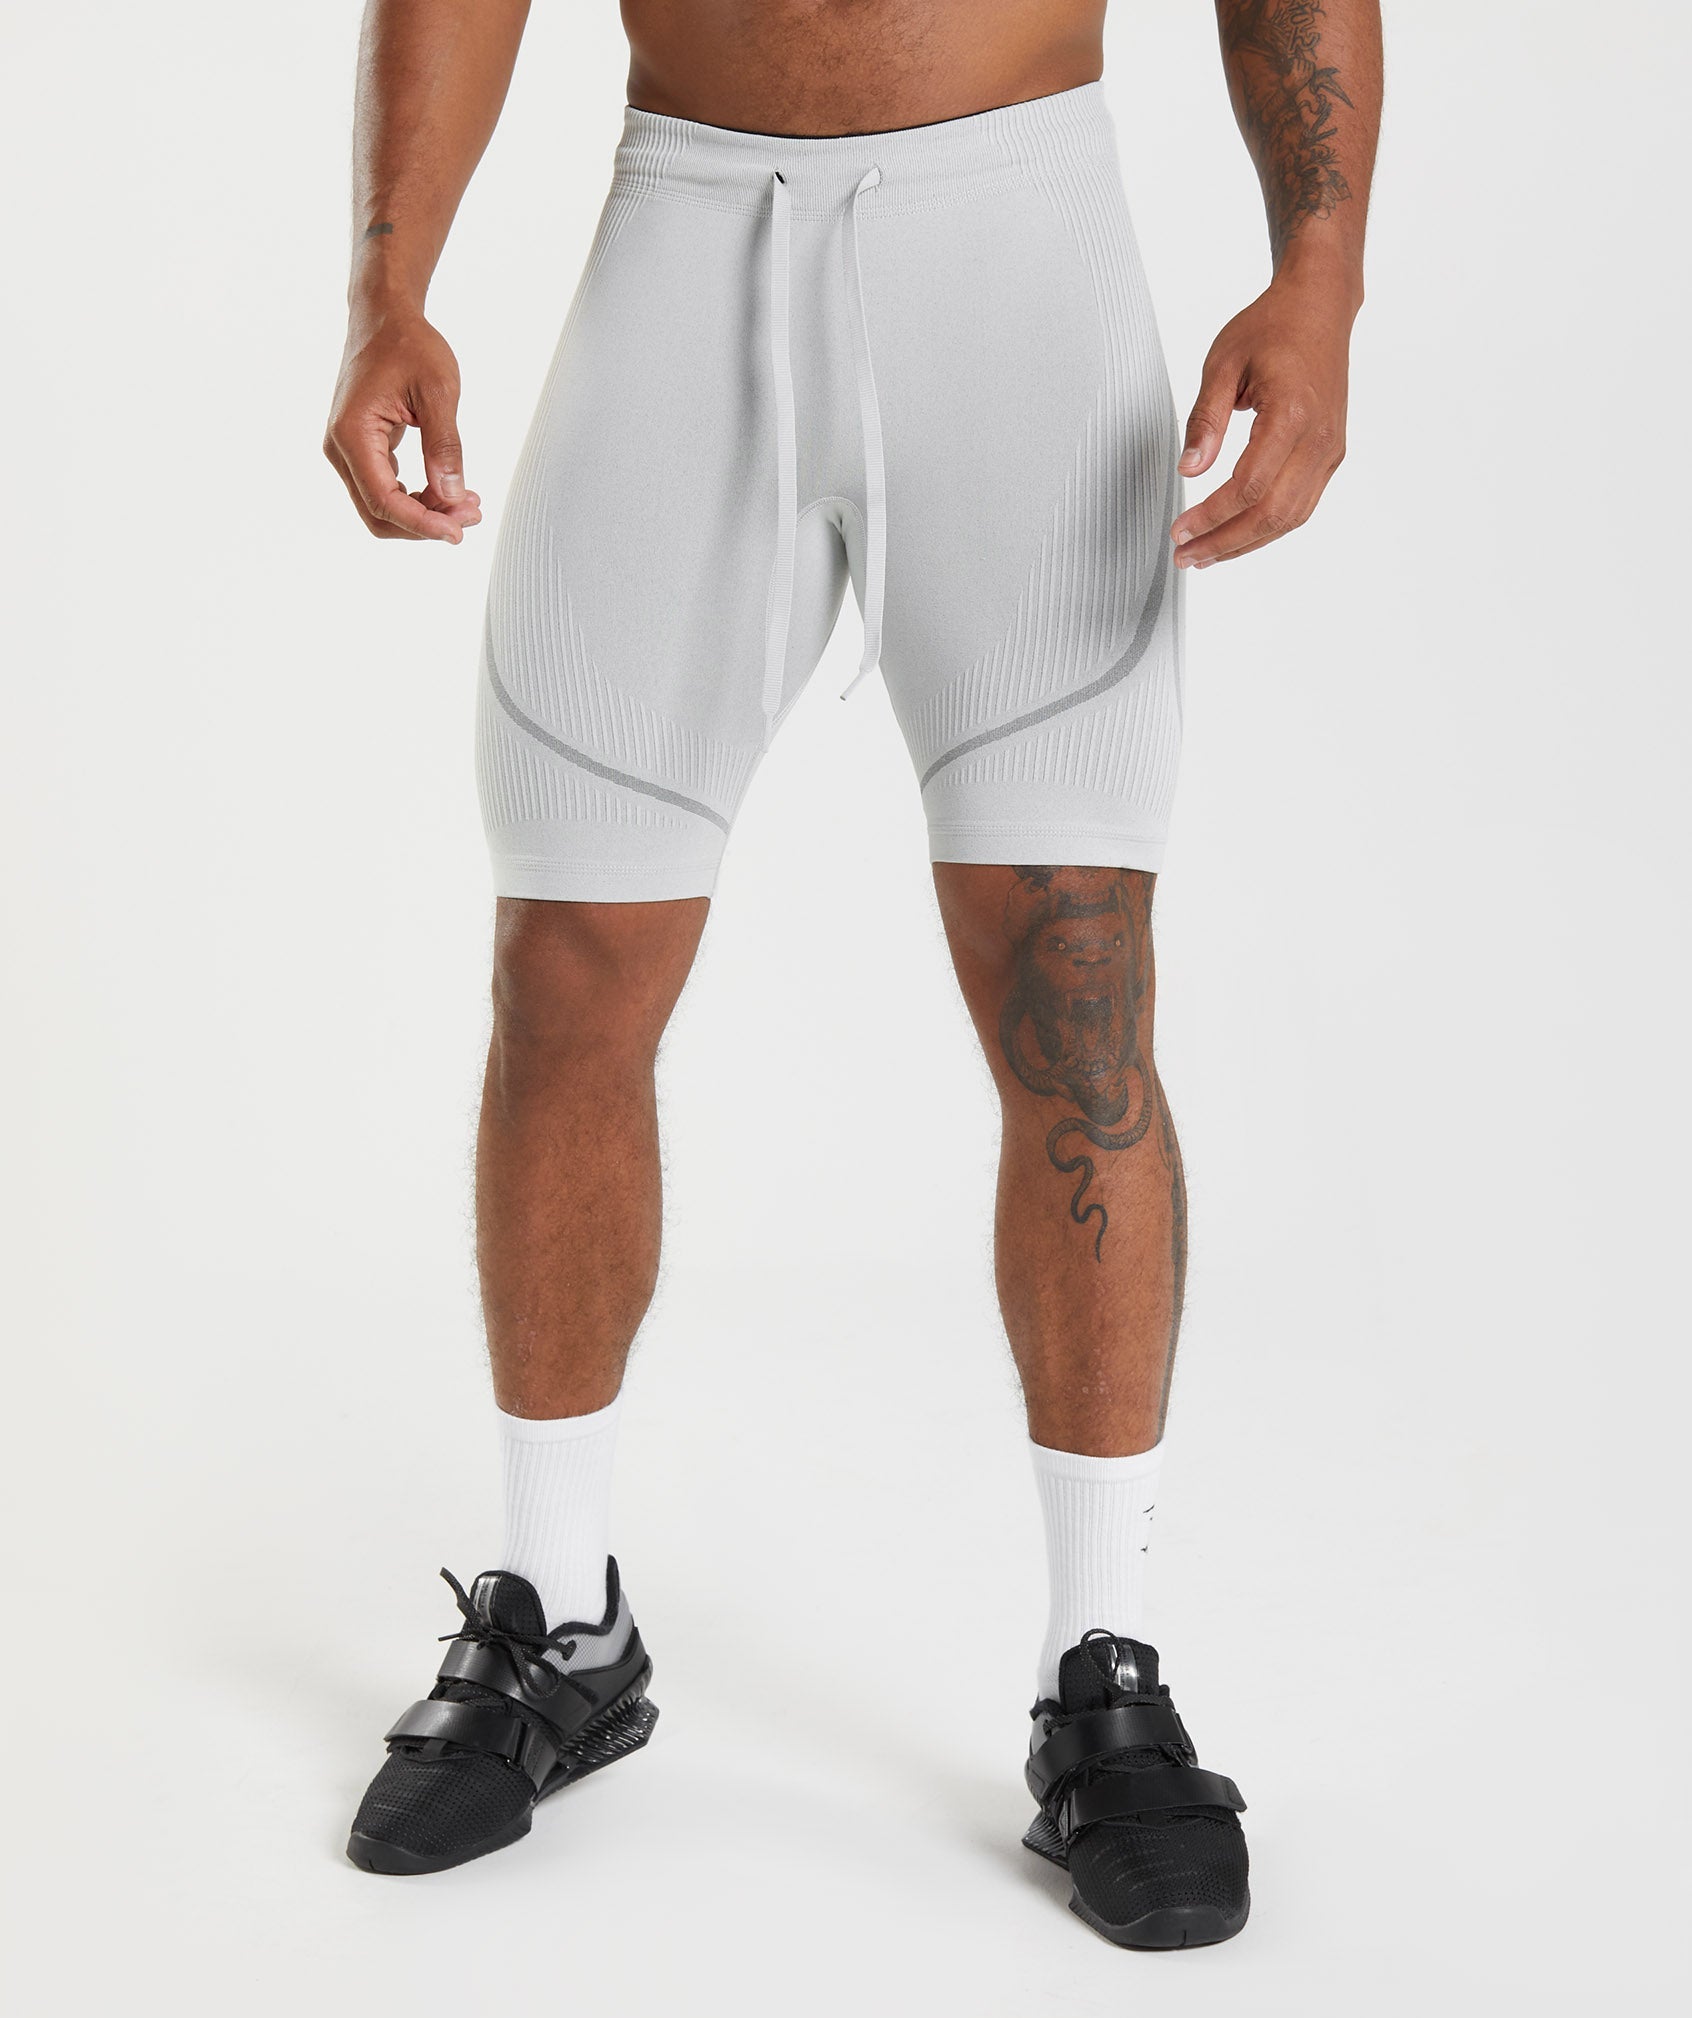 315 Seamless Shorts in Light Grey/Charcoal Grey